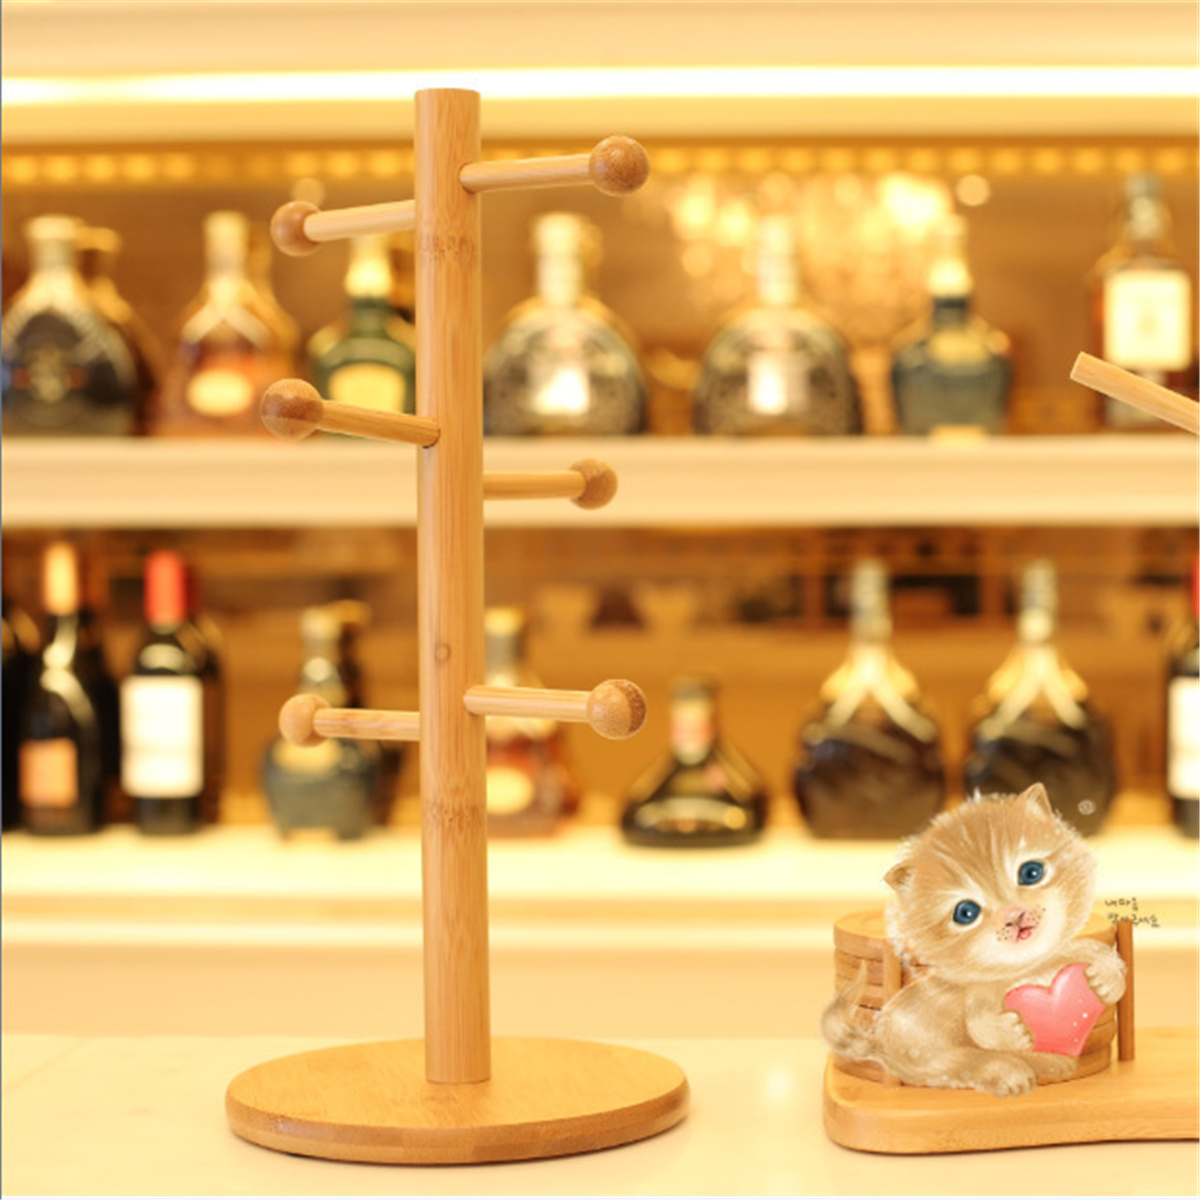 Wooden-Cup-Holder-Teacup-Mug-Drain-Rack-Stand-6-Cups-Drain-Cup-Hanging-Stand-Coffee-Cup-Display-Stan-1777089-5